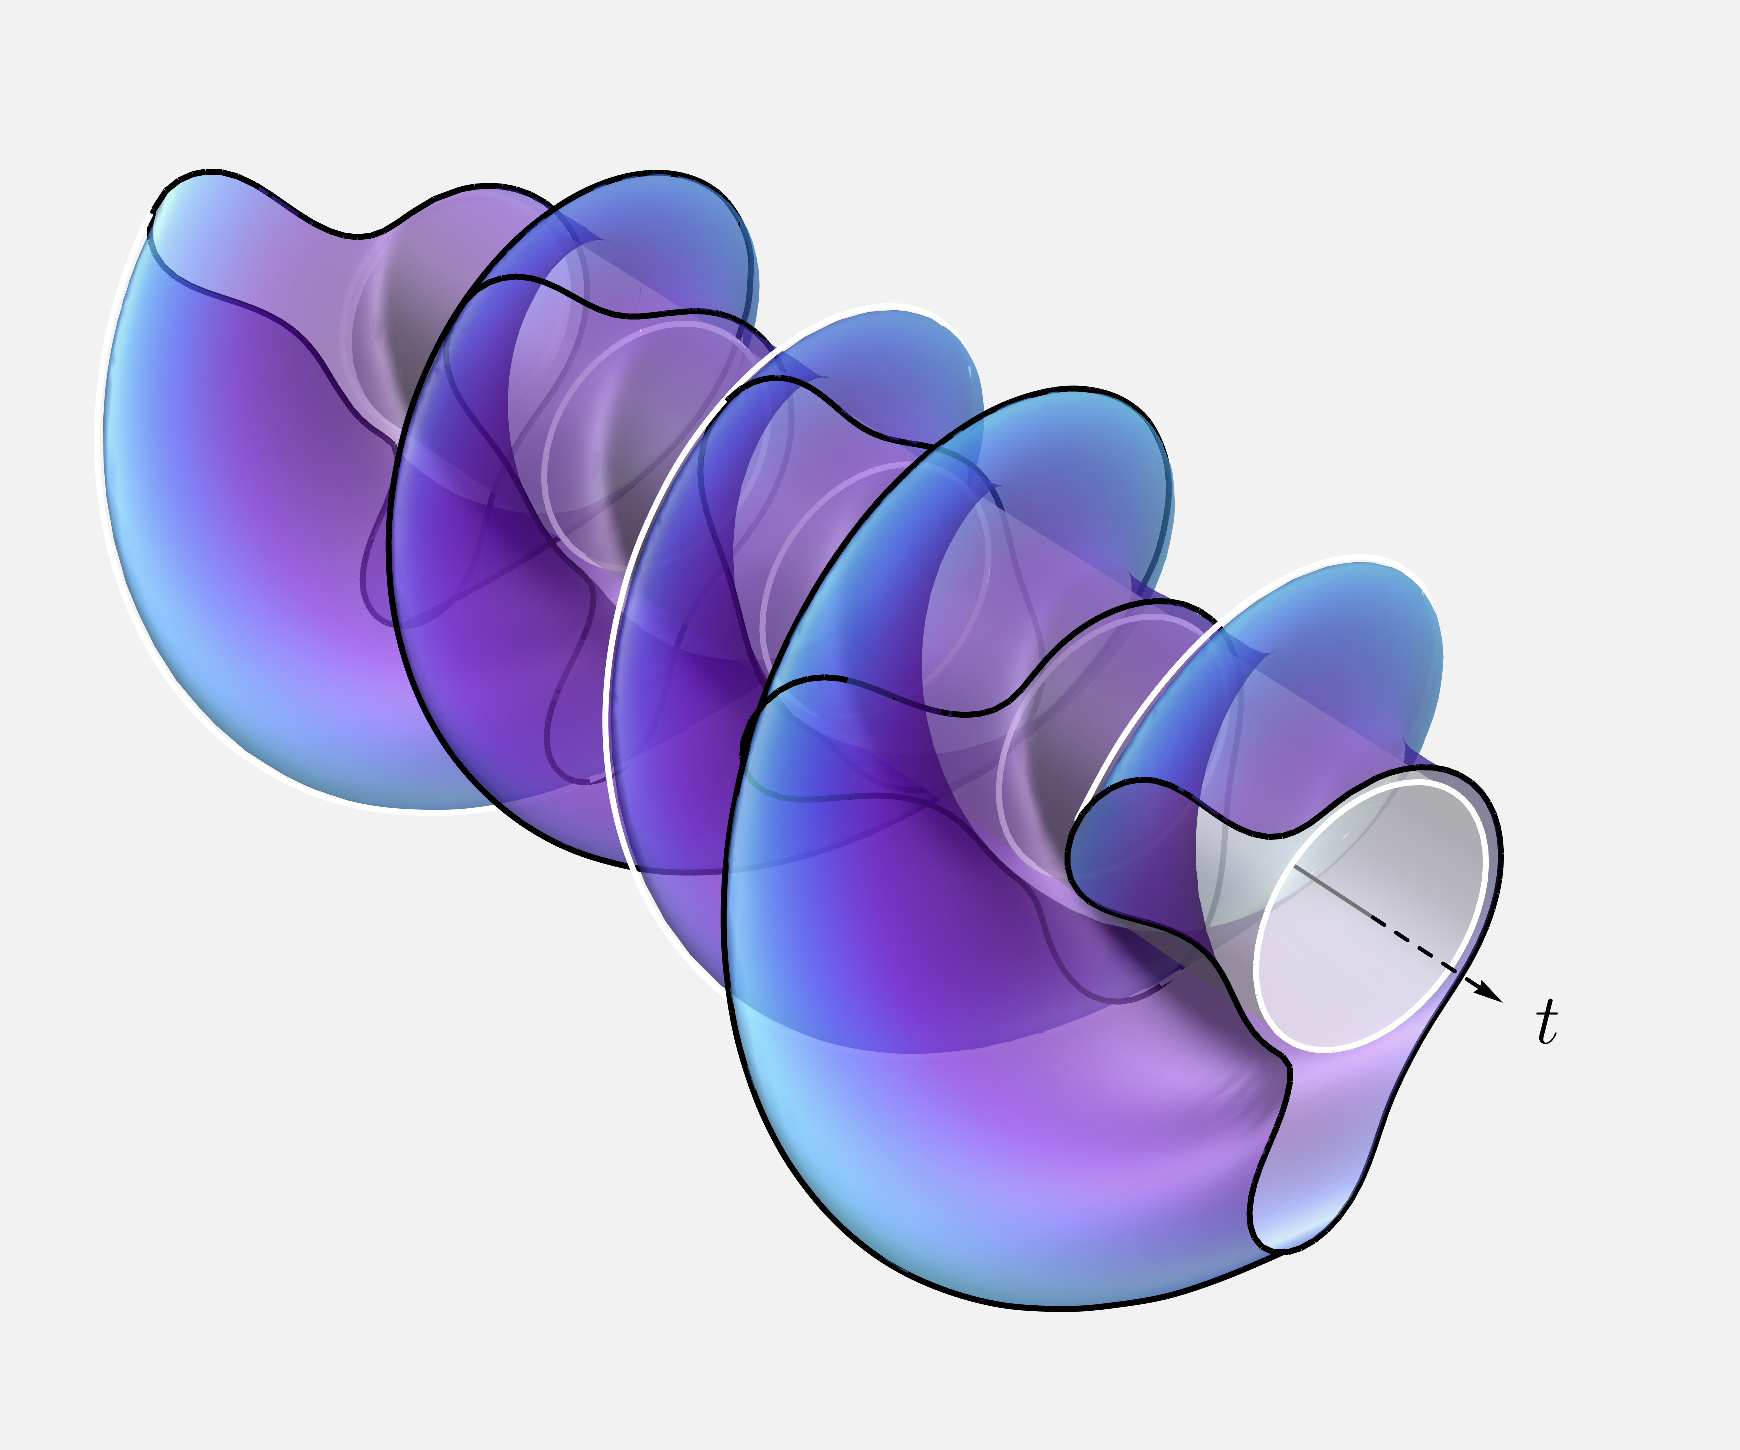 <p>Intricate, time-periodic motion of double-droplet structure formed in a simulation of the Moffatt problem. The work is based on novel thick-flow formulations of low-order models, and their comparisons with direct numerical simulations. This is a computer rendering of this complex motion, designed to try to elucidate the sort of motion usually only decipherable via video. Further details are available at https://doi.org/10.1017/jfm.2020.421.(Simulation results are unaltered.)</p>
